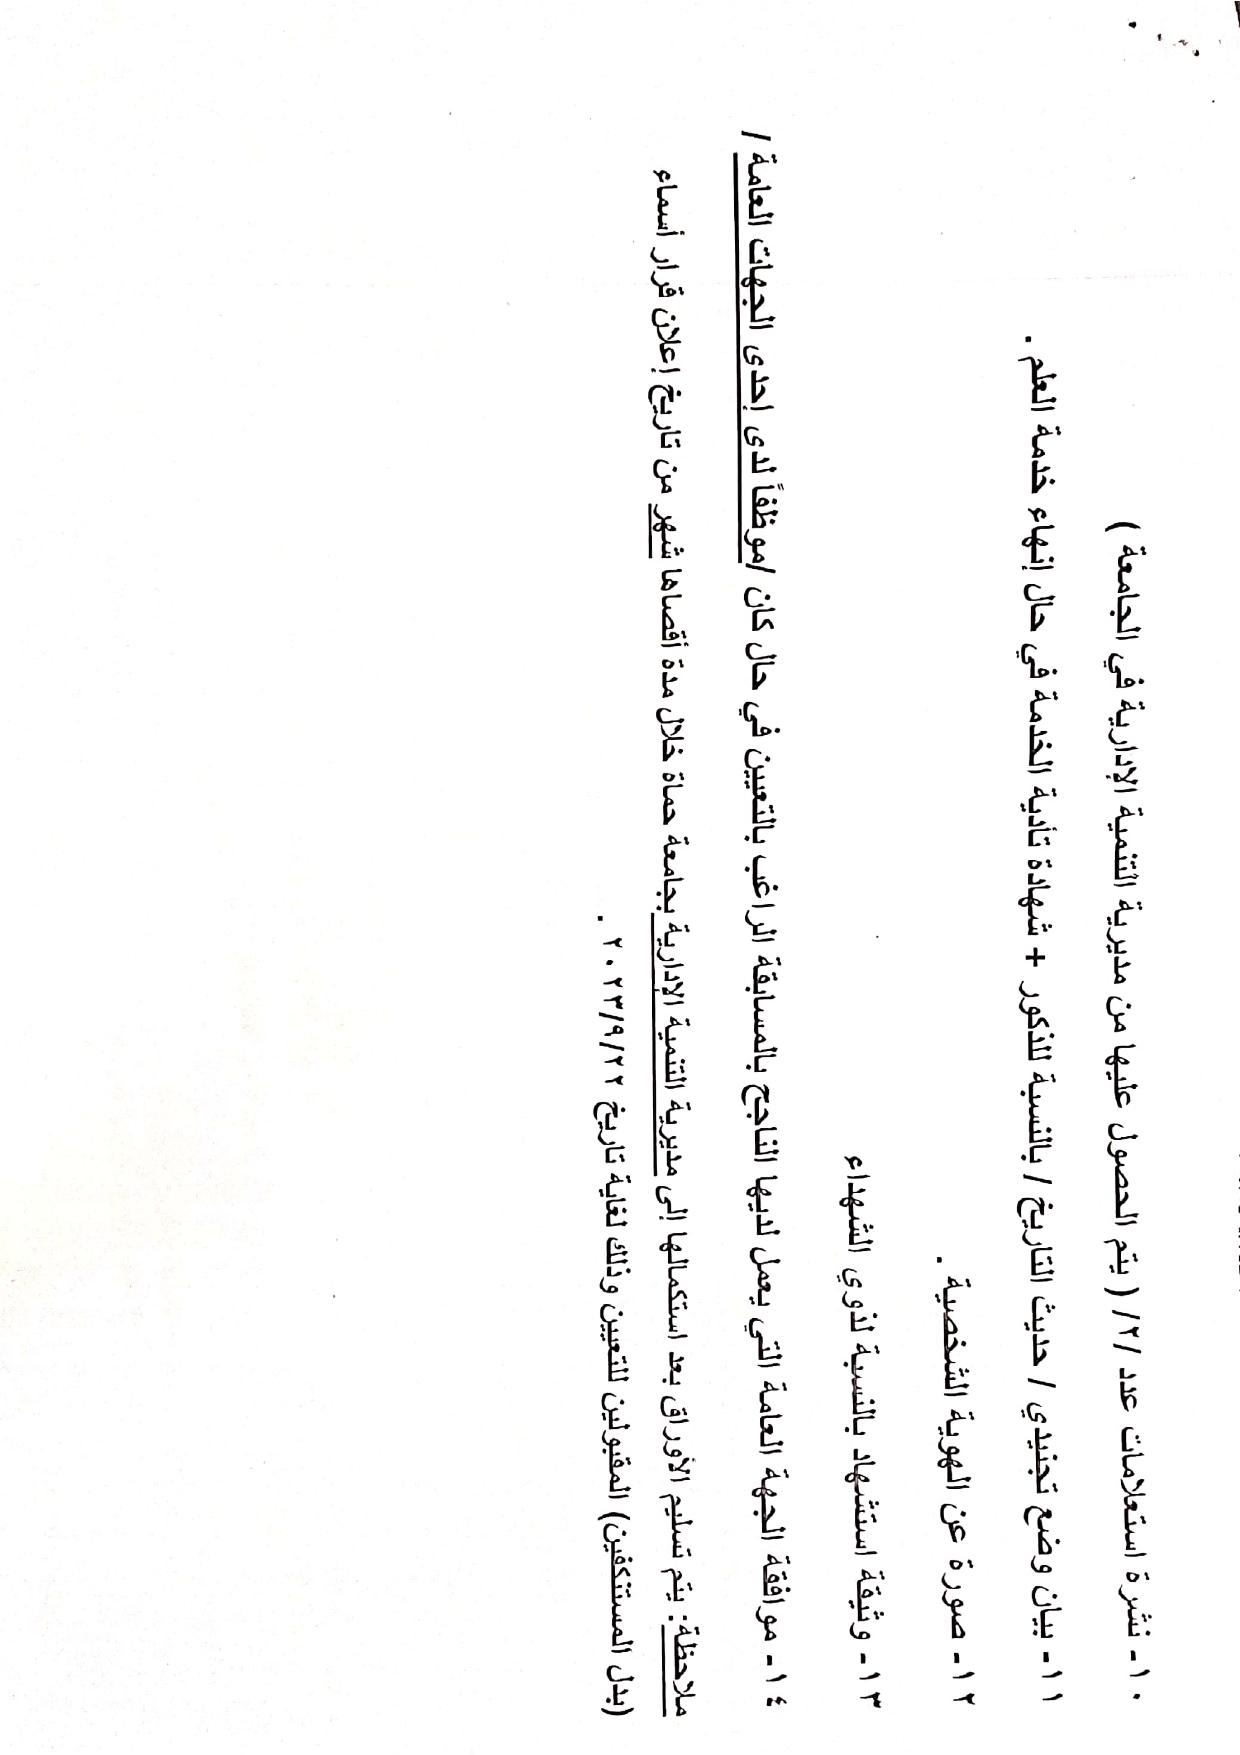 CamScanner ٠٩ ٠٦ ٢٠٢٣ ١٣.٠٢ page 0003